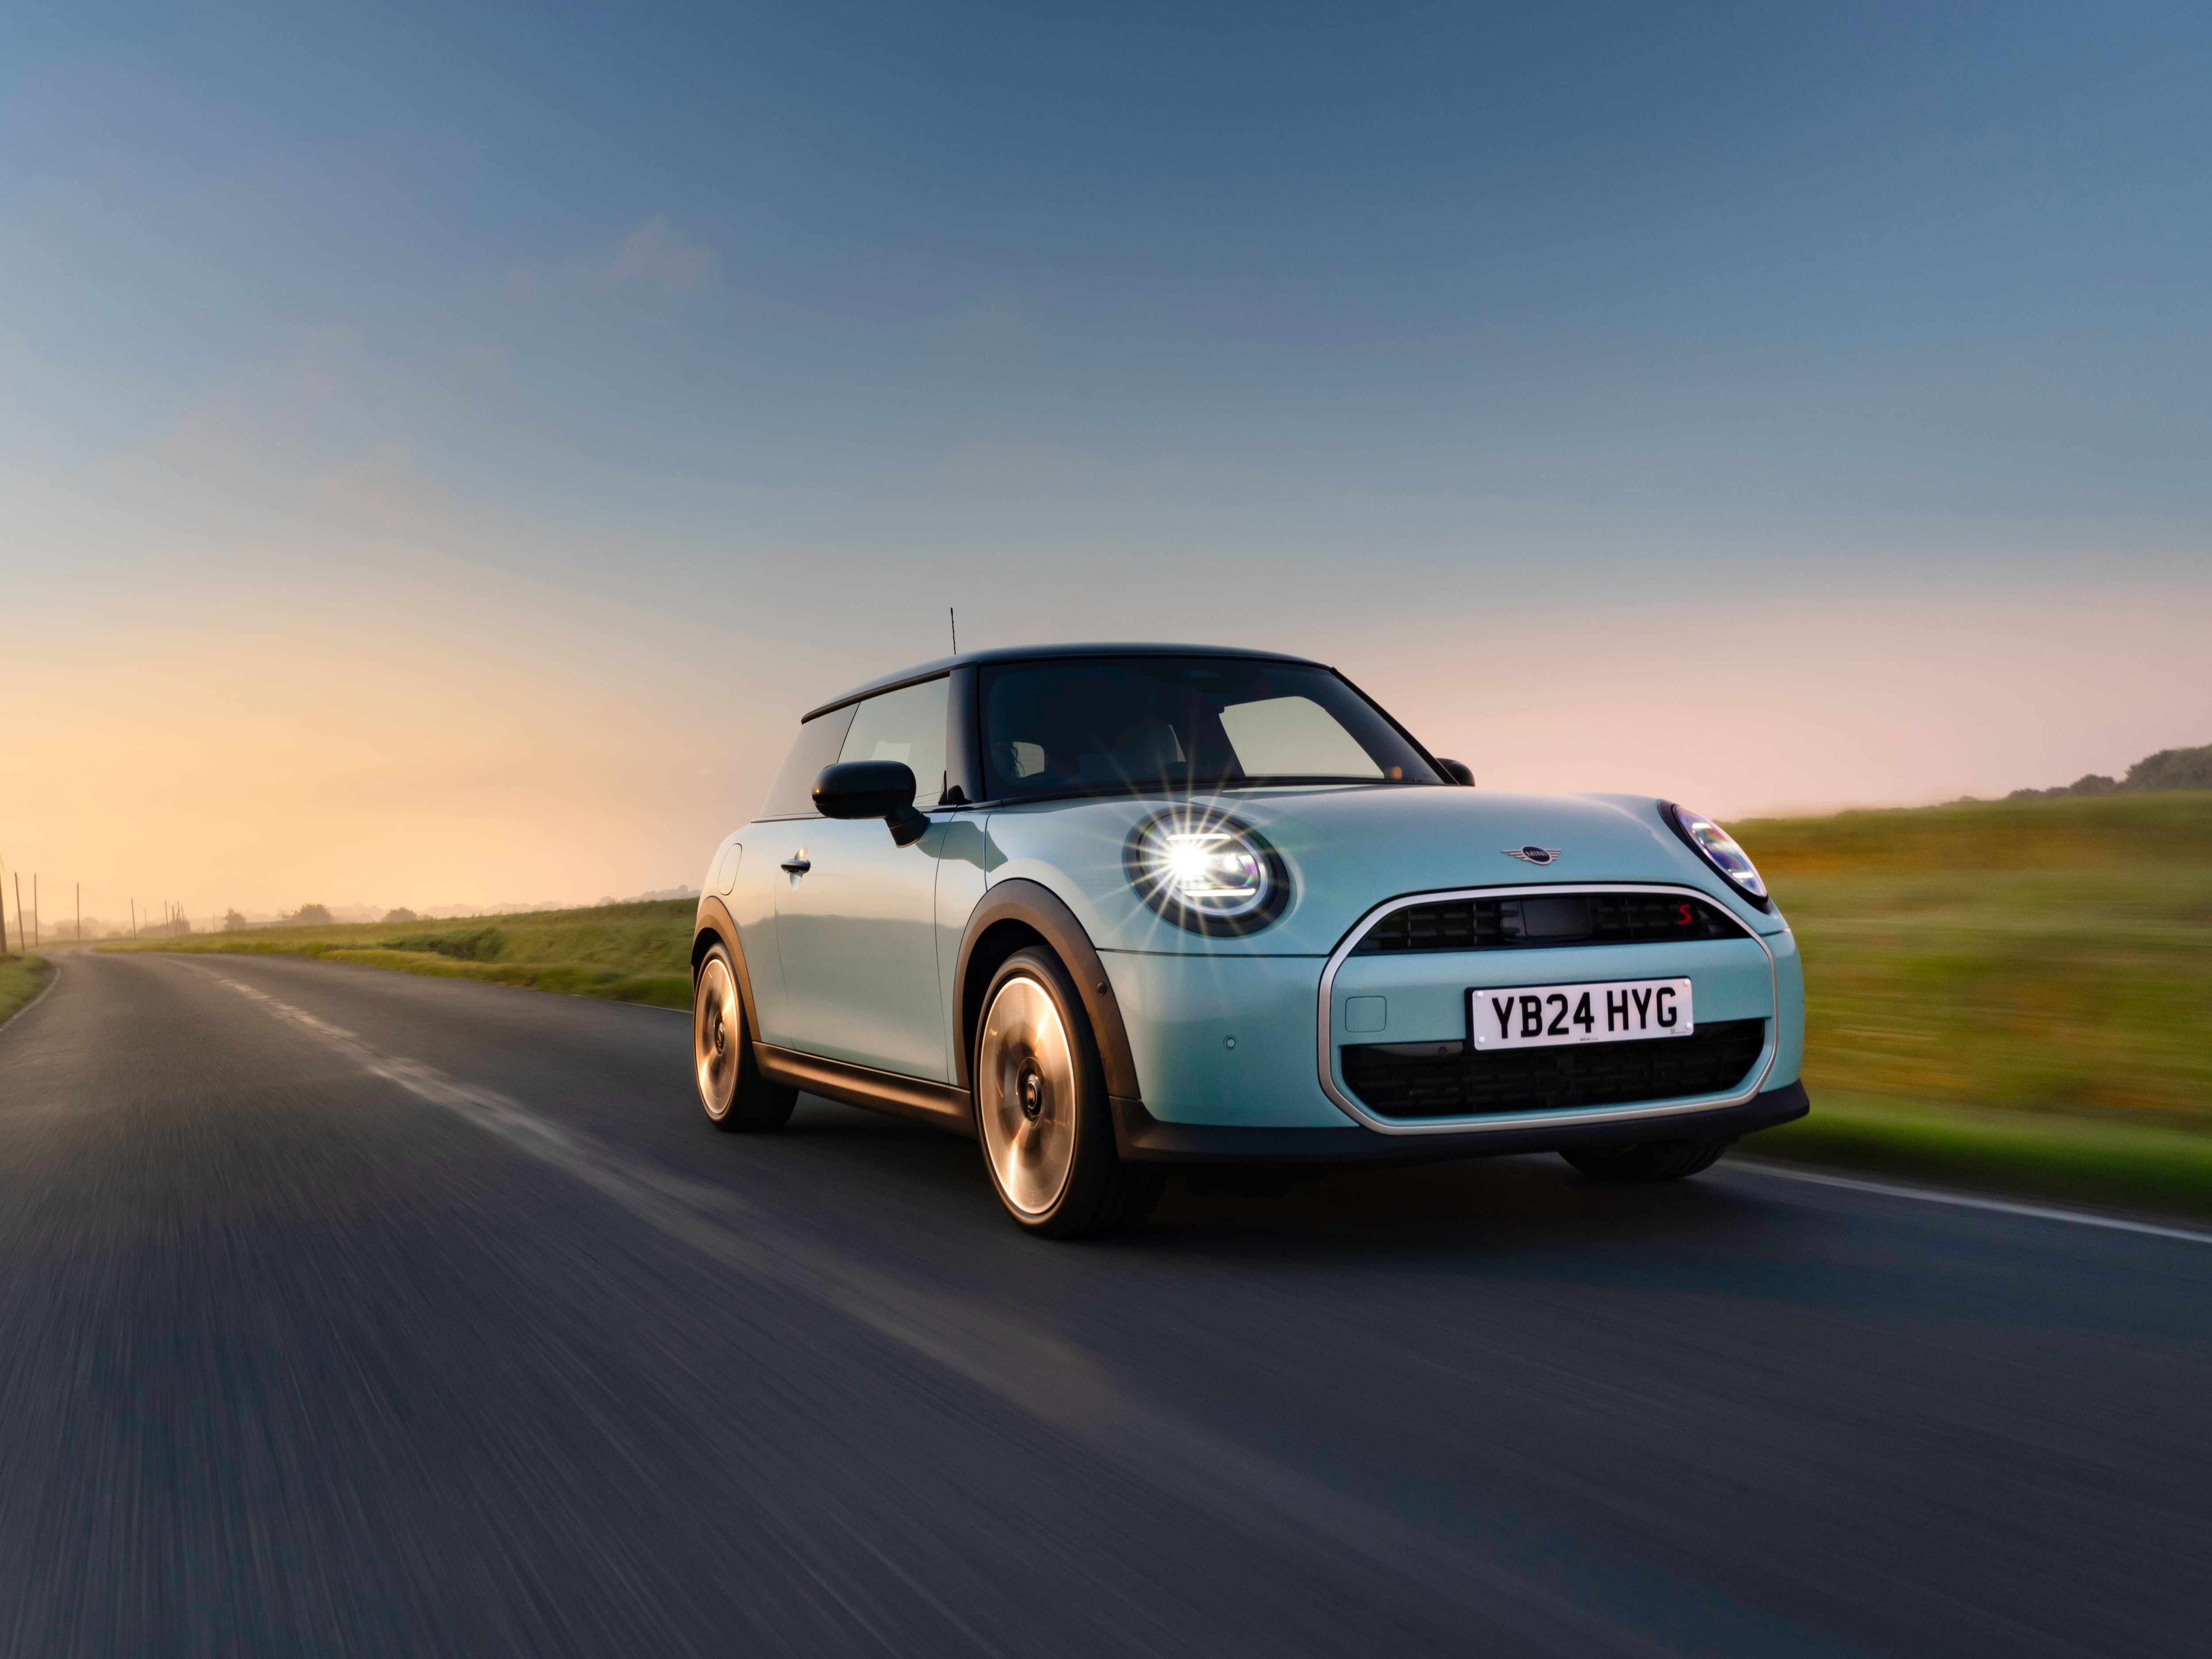 First Drive: Mini’s petrol-powered Cooper S remains a fun-infused hatchback